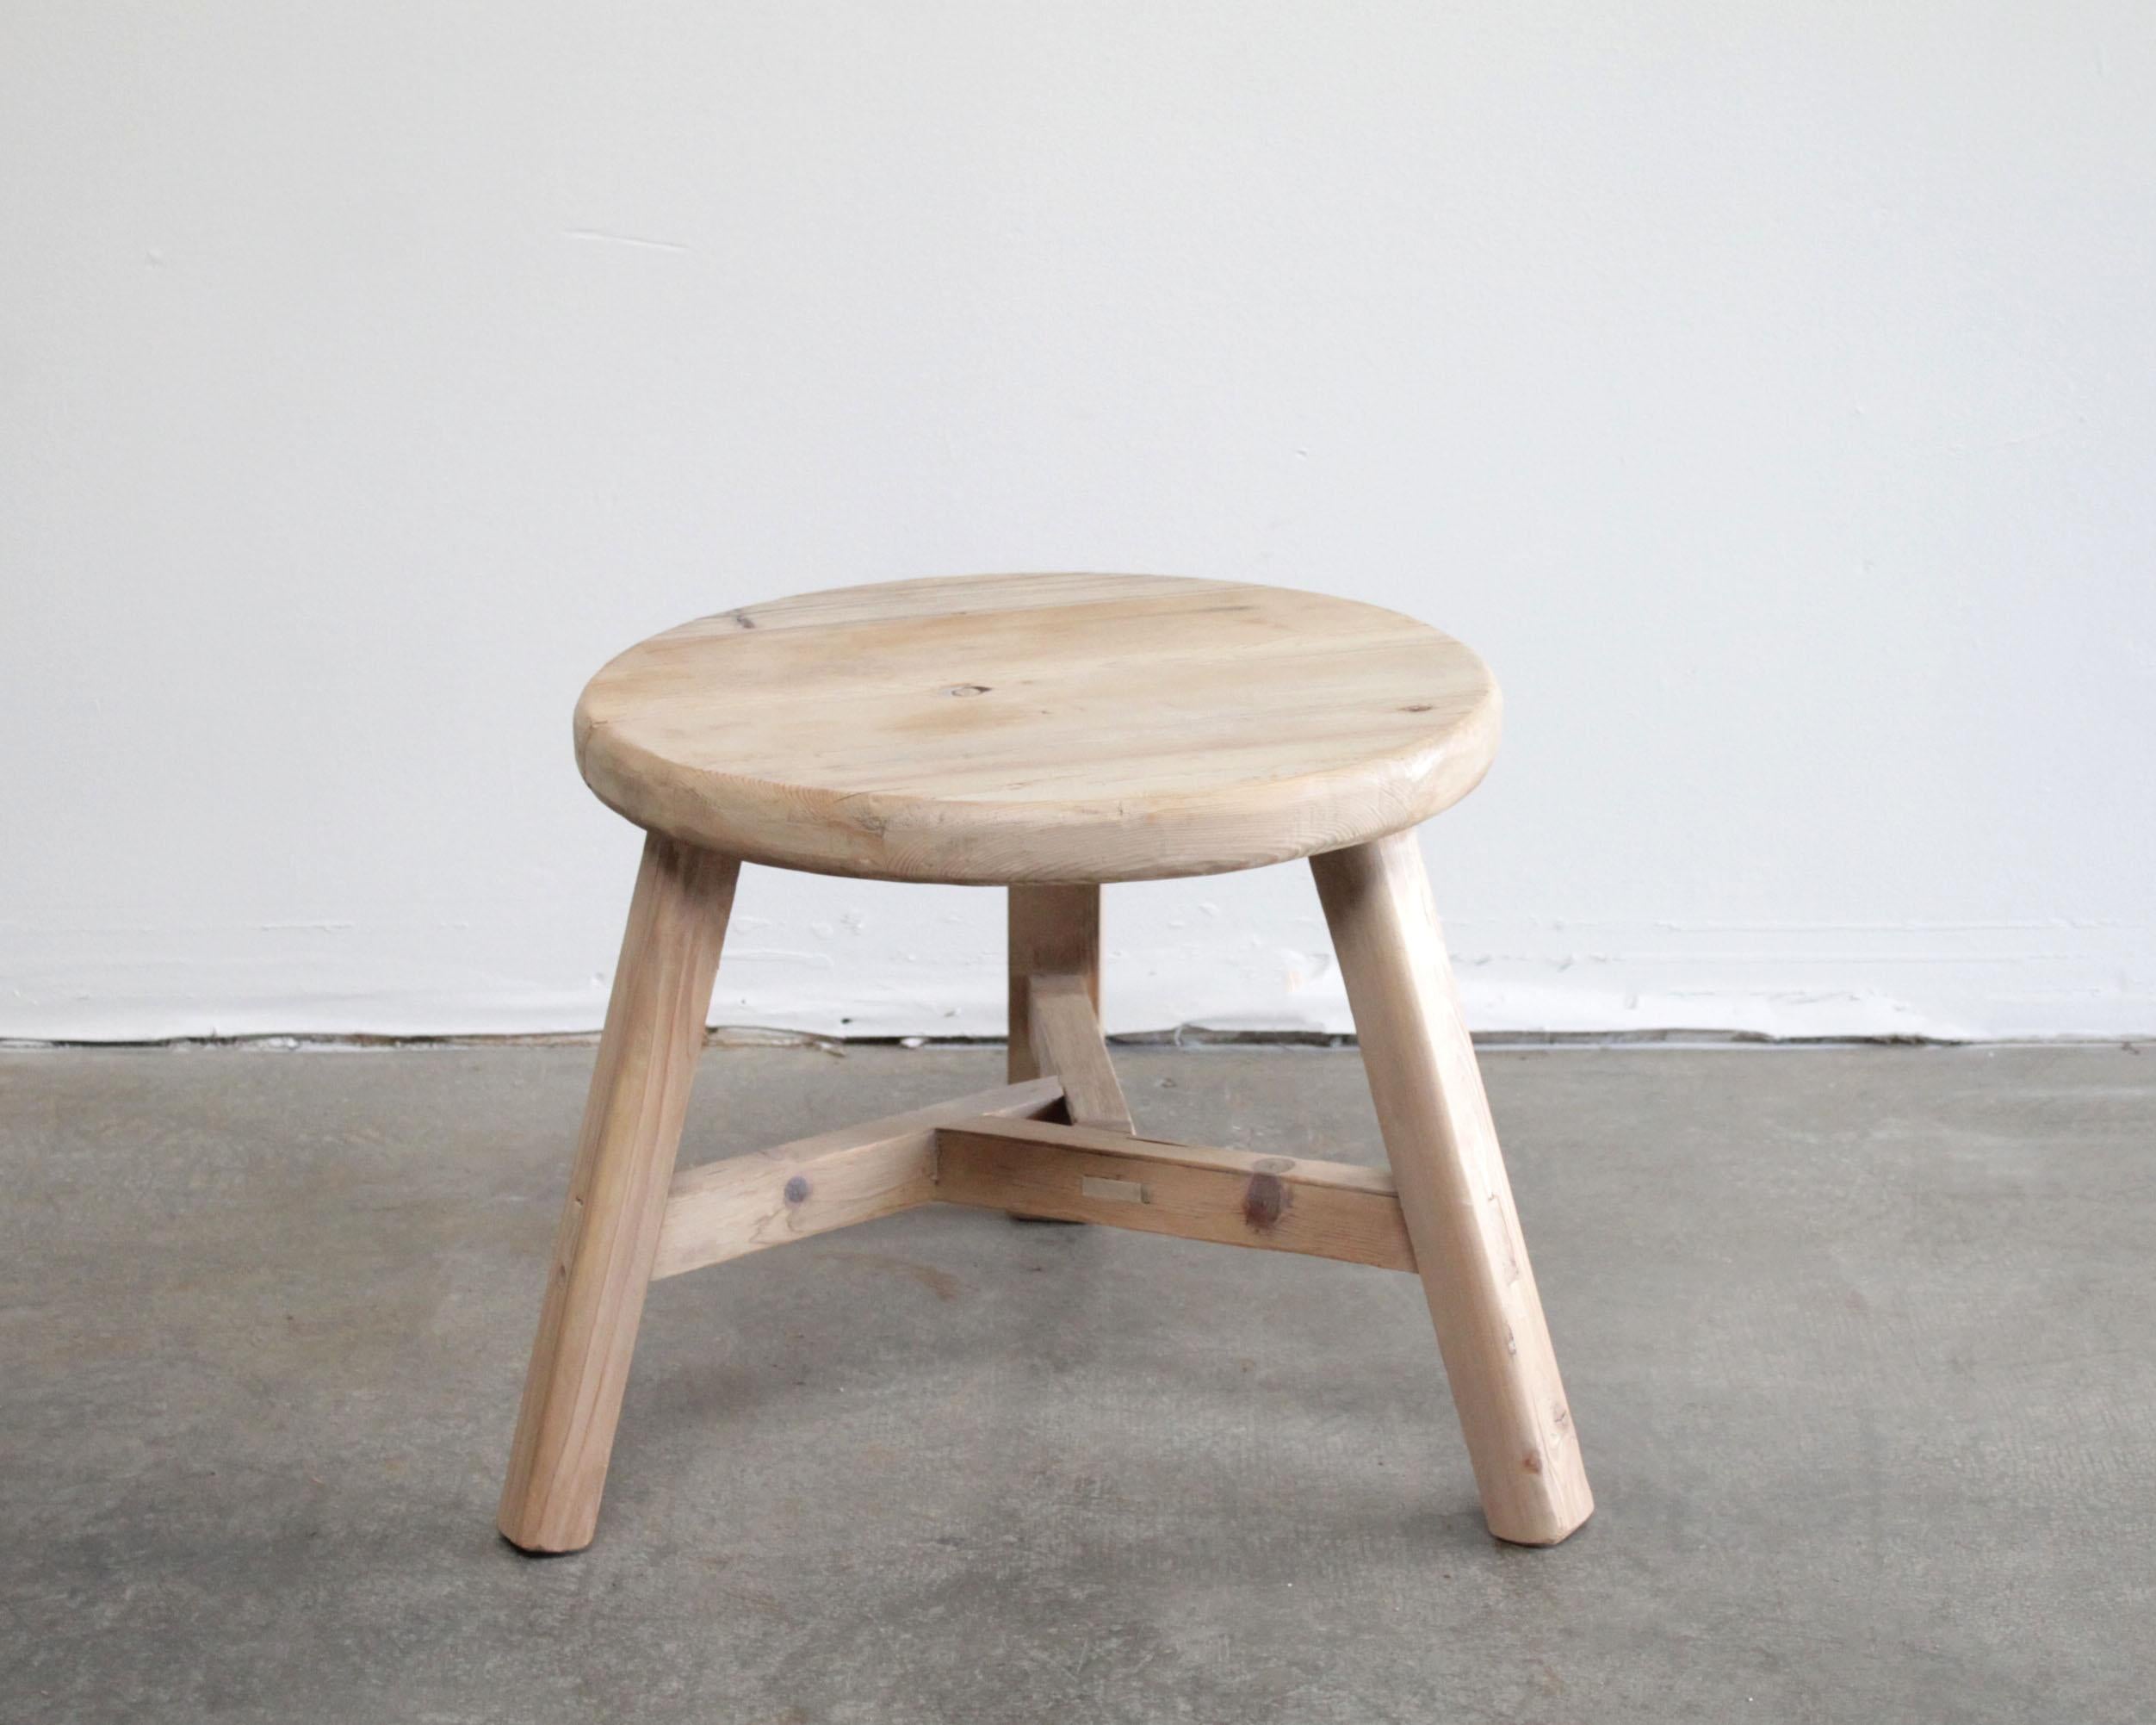 Round natural side table made from reclaimed elmwood raw natural finish, a warm honey with gray tones in the wood. Solid and sturdy, a great side table for next to a bed, sofa, chairs. Can be stained or painted for a customized look
Size: 24